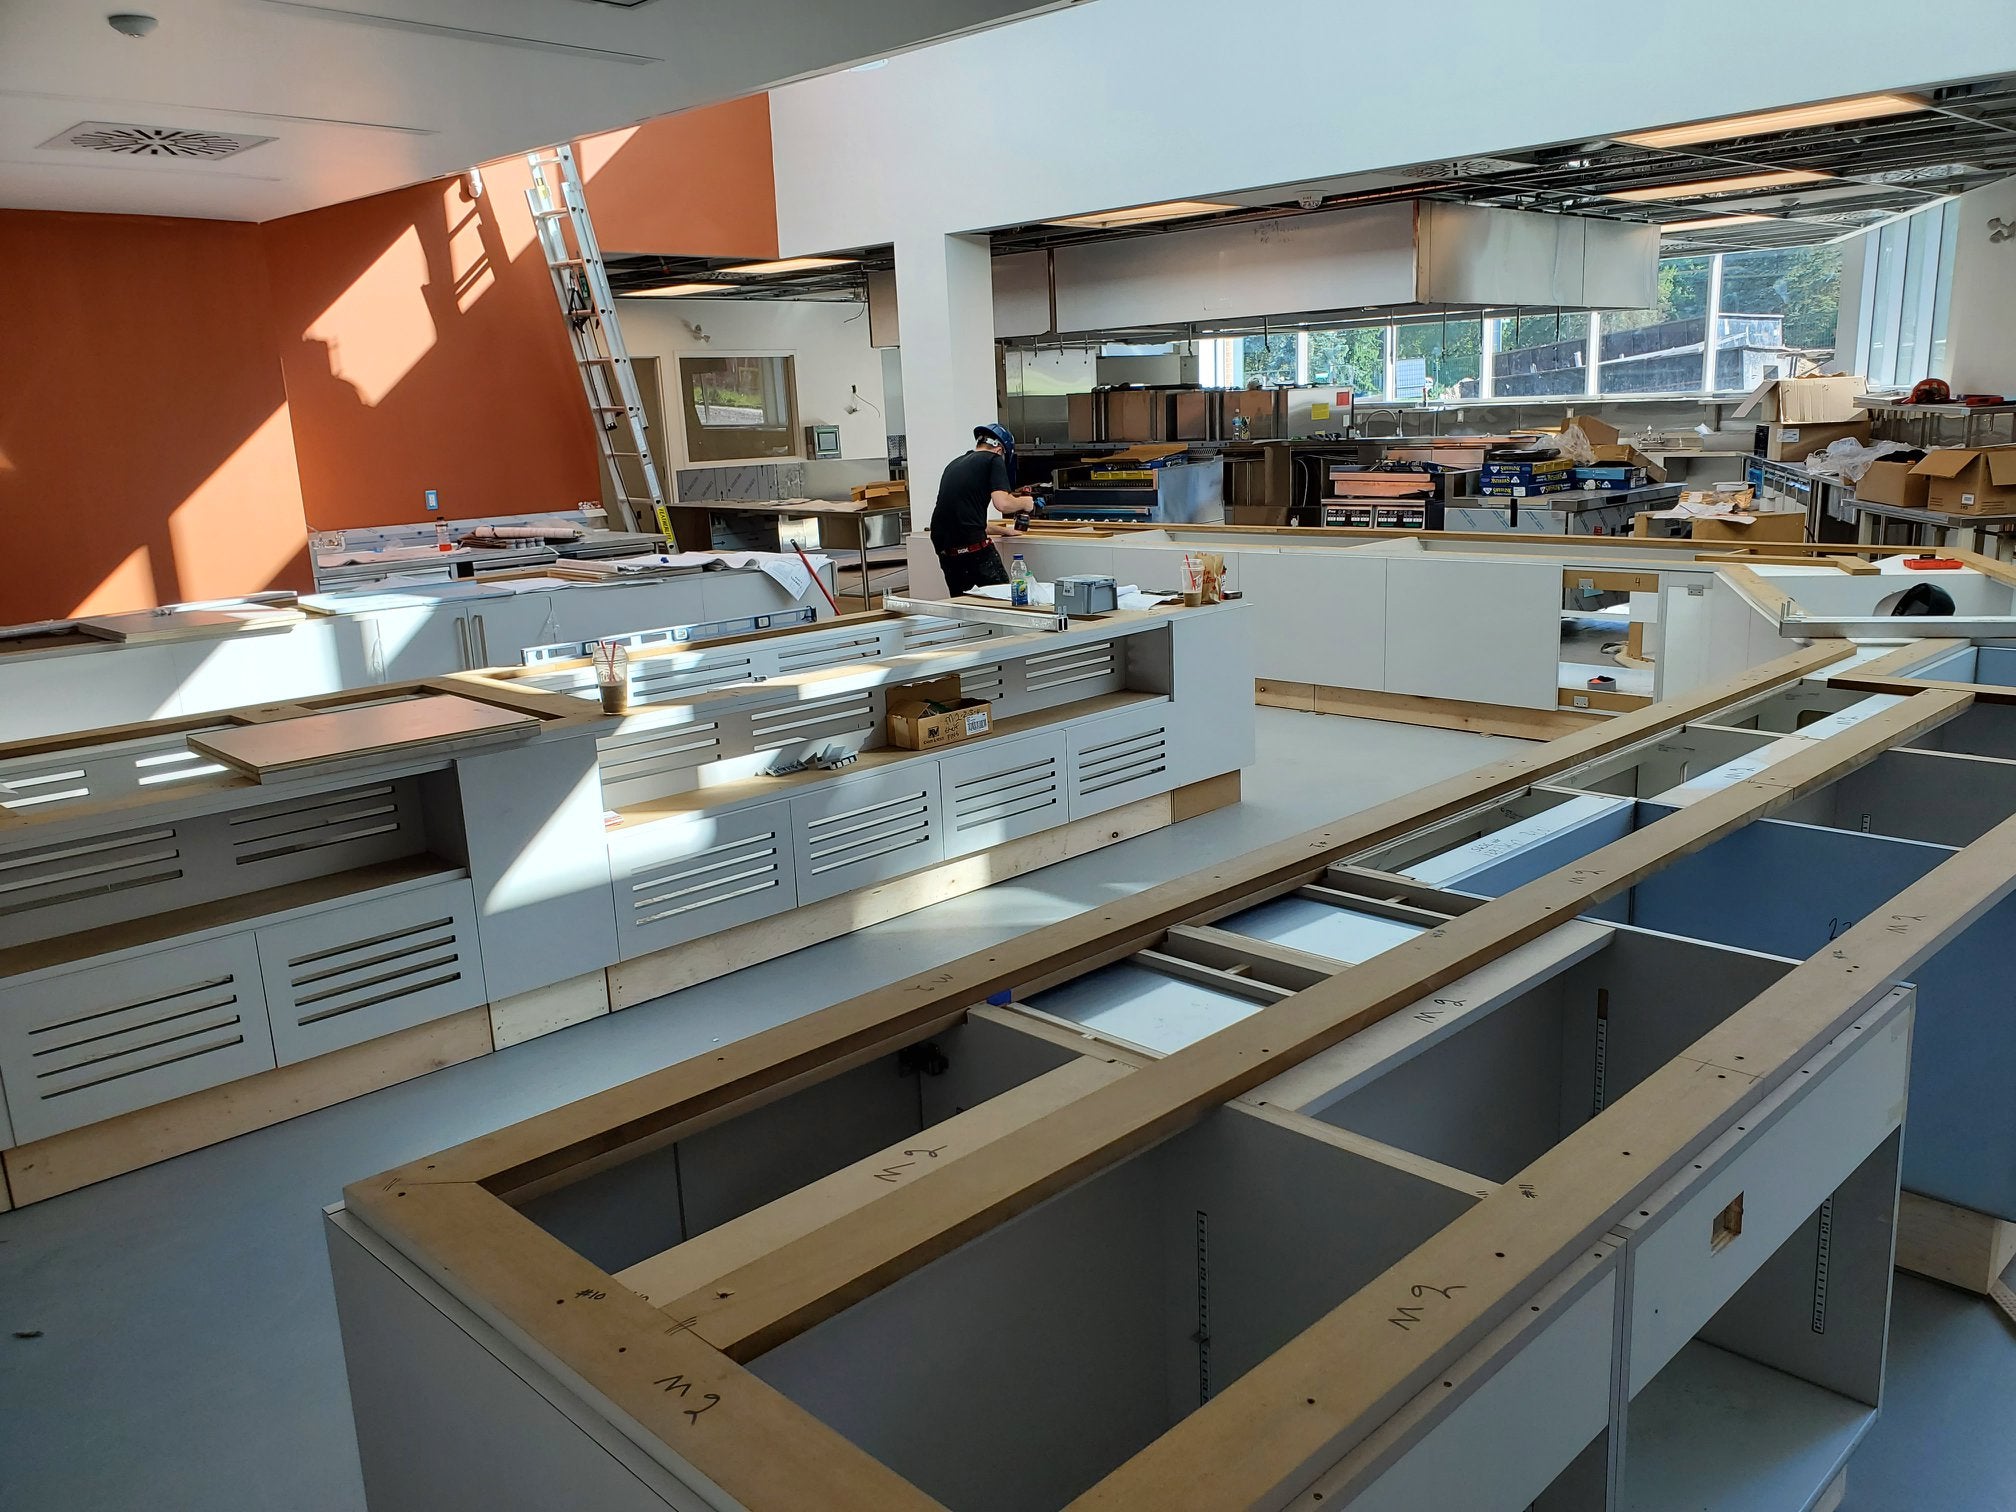 Cupboard structures begin being installed in the kitchen service area